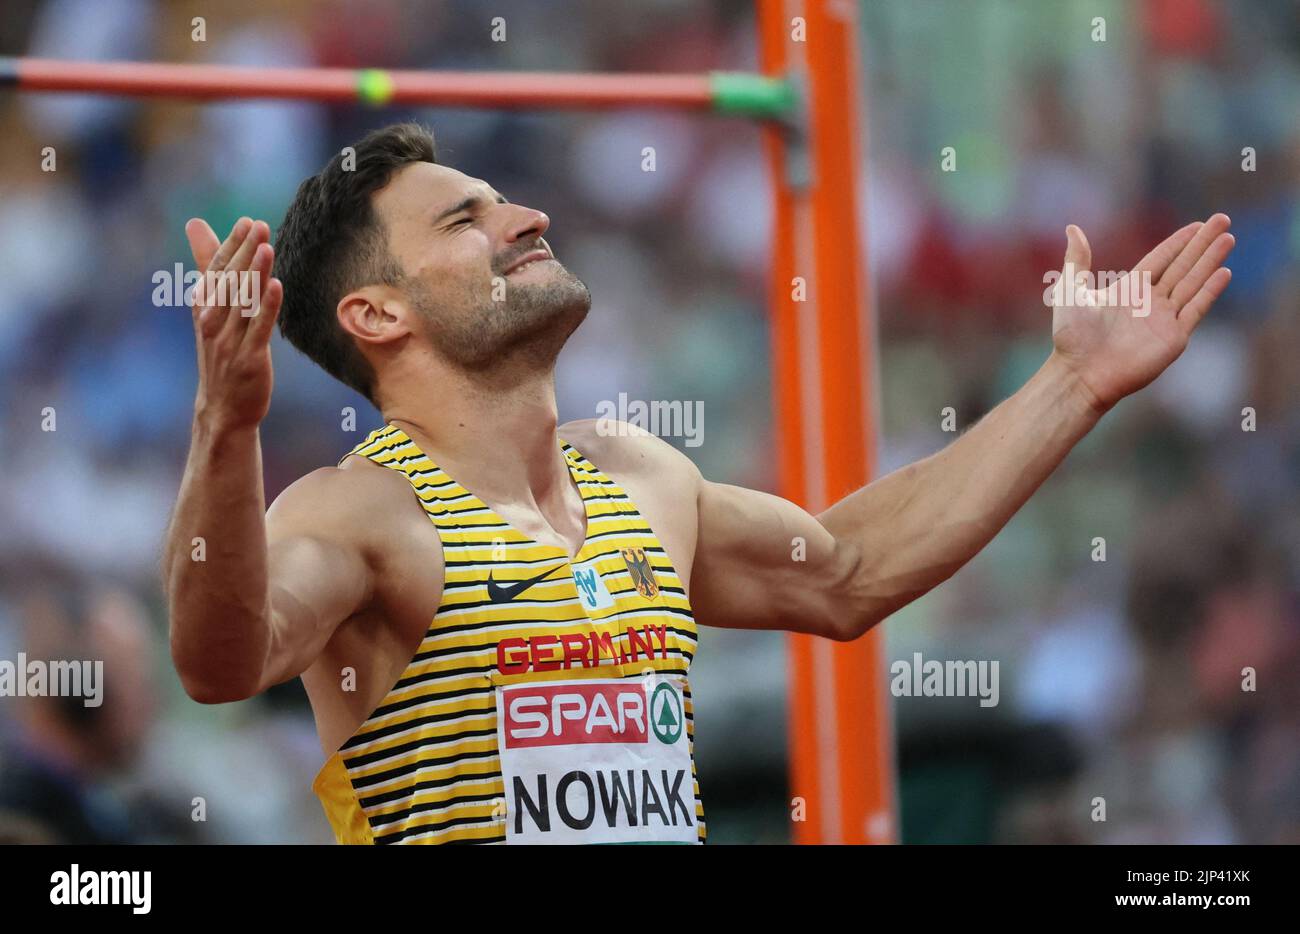 Athletics - 2022 European Championships - Olympiastadion, Munich, Germany - August 15, 2022 Germany's Tim Nowak reacts after his jump on the Men's Decathlon High Jump - Group A REUTERS/Wolfgang Rattay Stock Photo